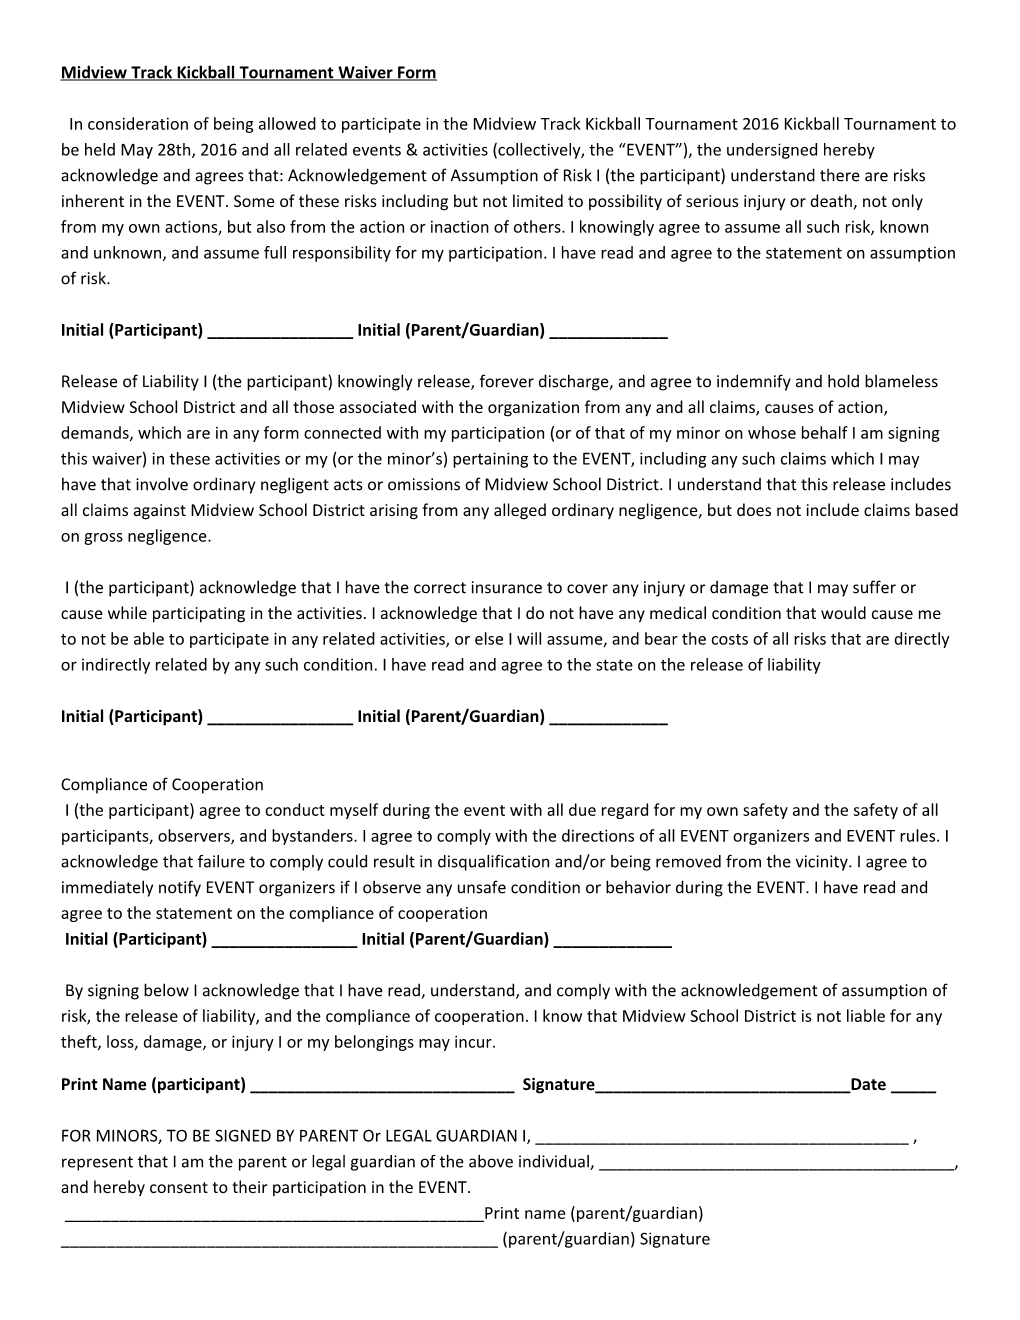 Midview Track Kickball Tournament Waiver Form in Consideration of Being Allowed to Participate